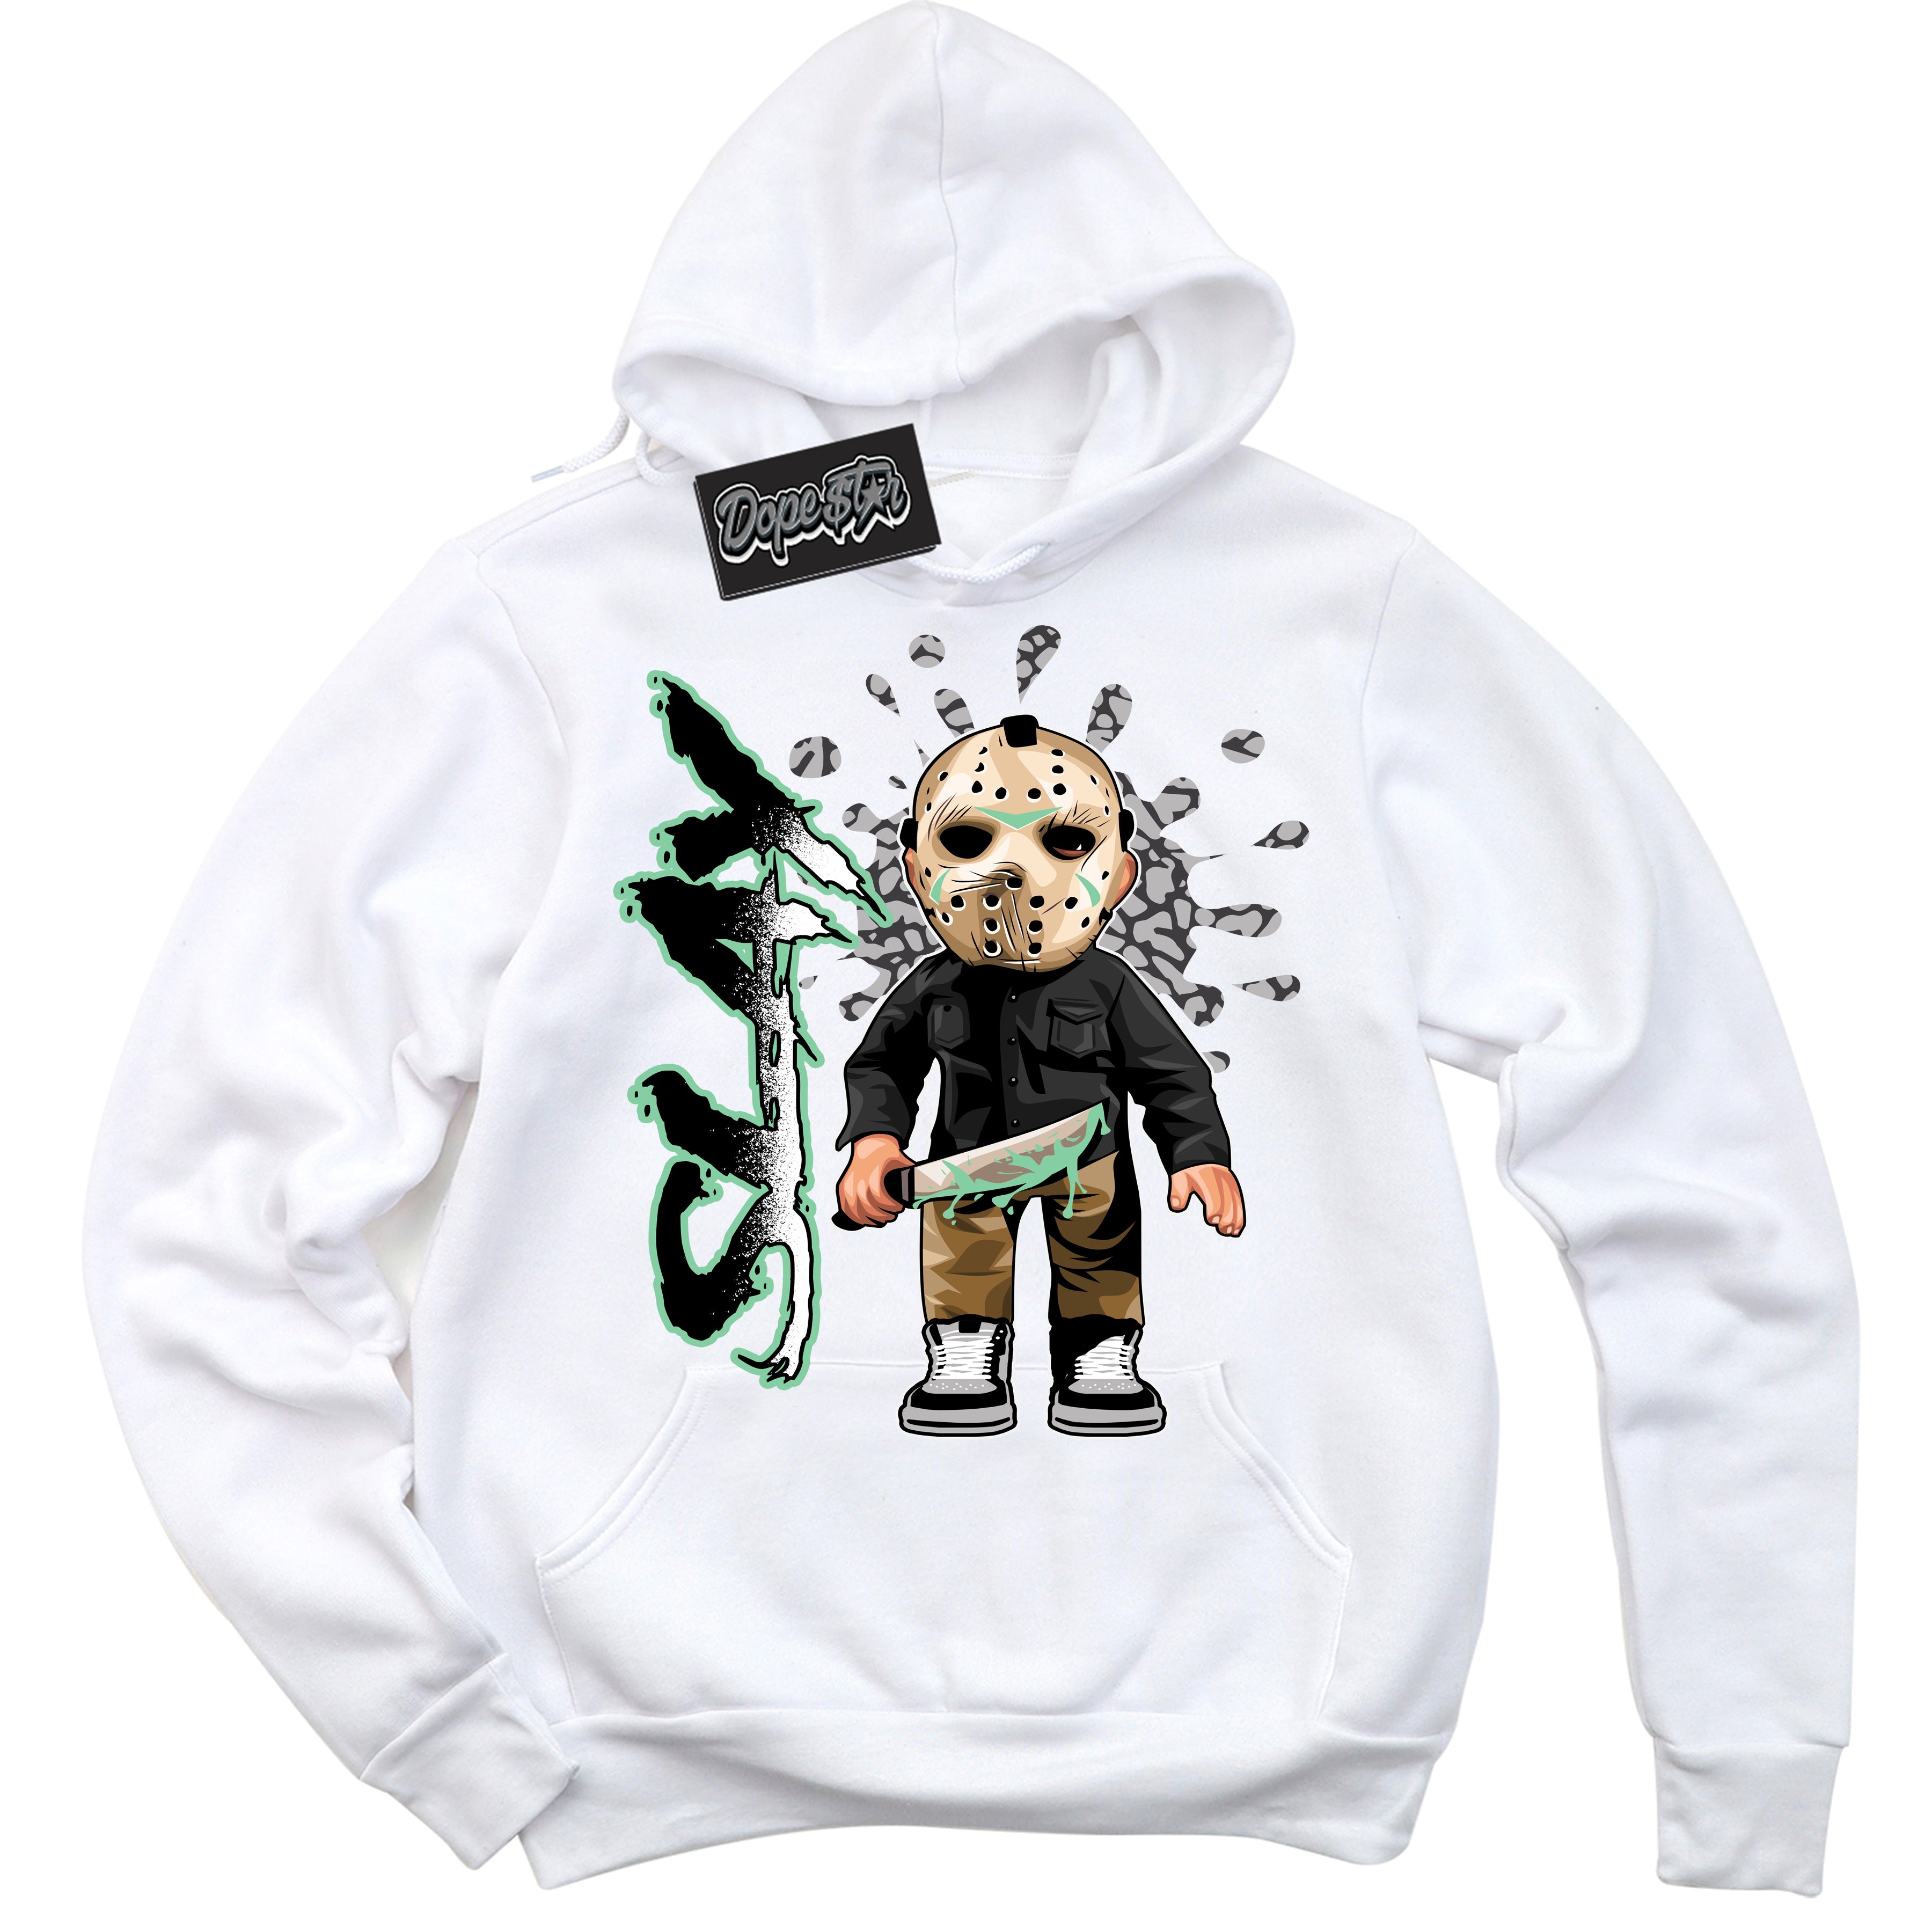 Cool White Graphic DopeStar Hoodie with “ Slay “ print, that perfectly matches Green Glow 3s sneakers